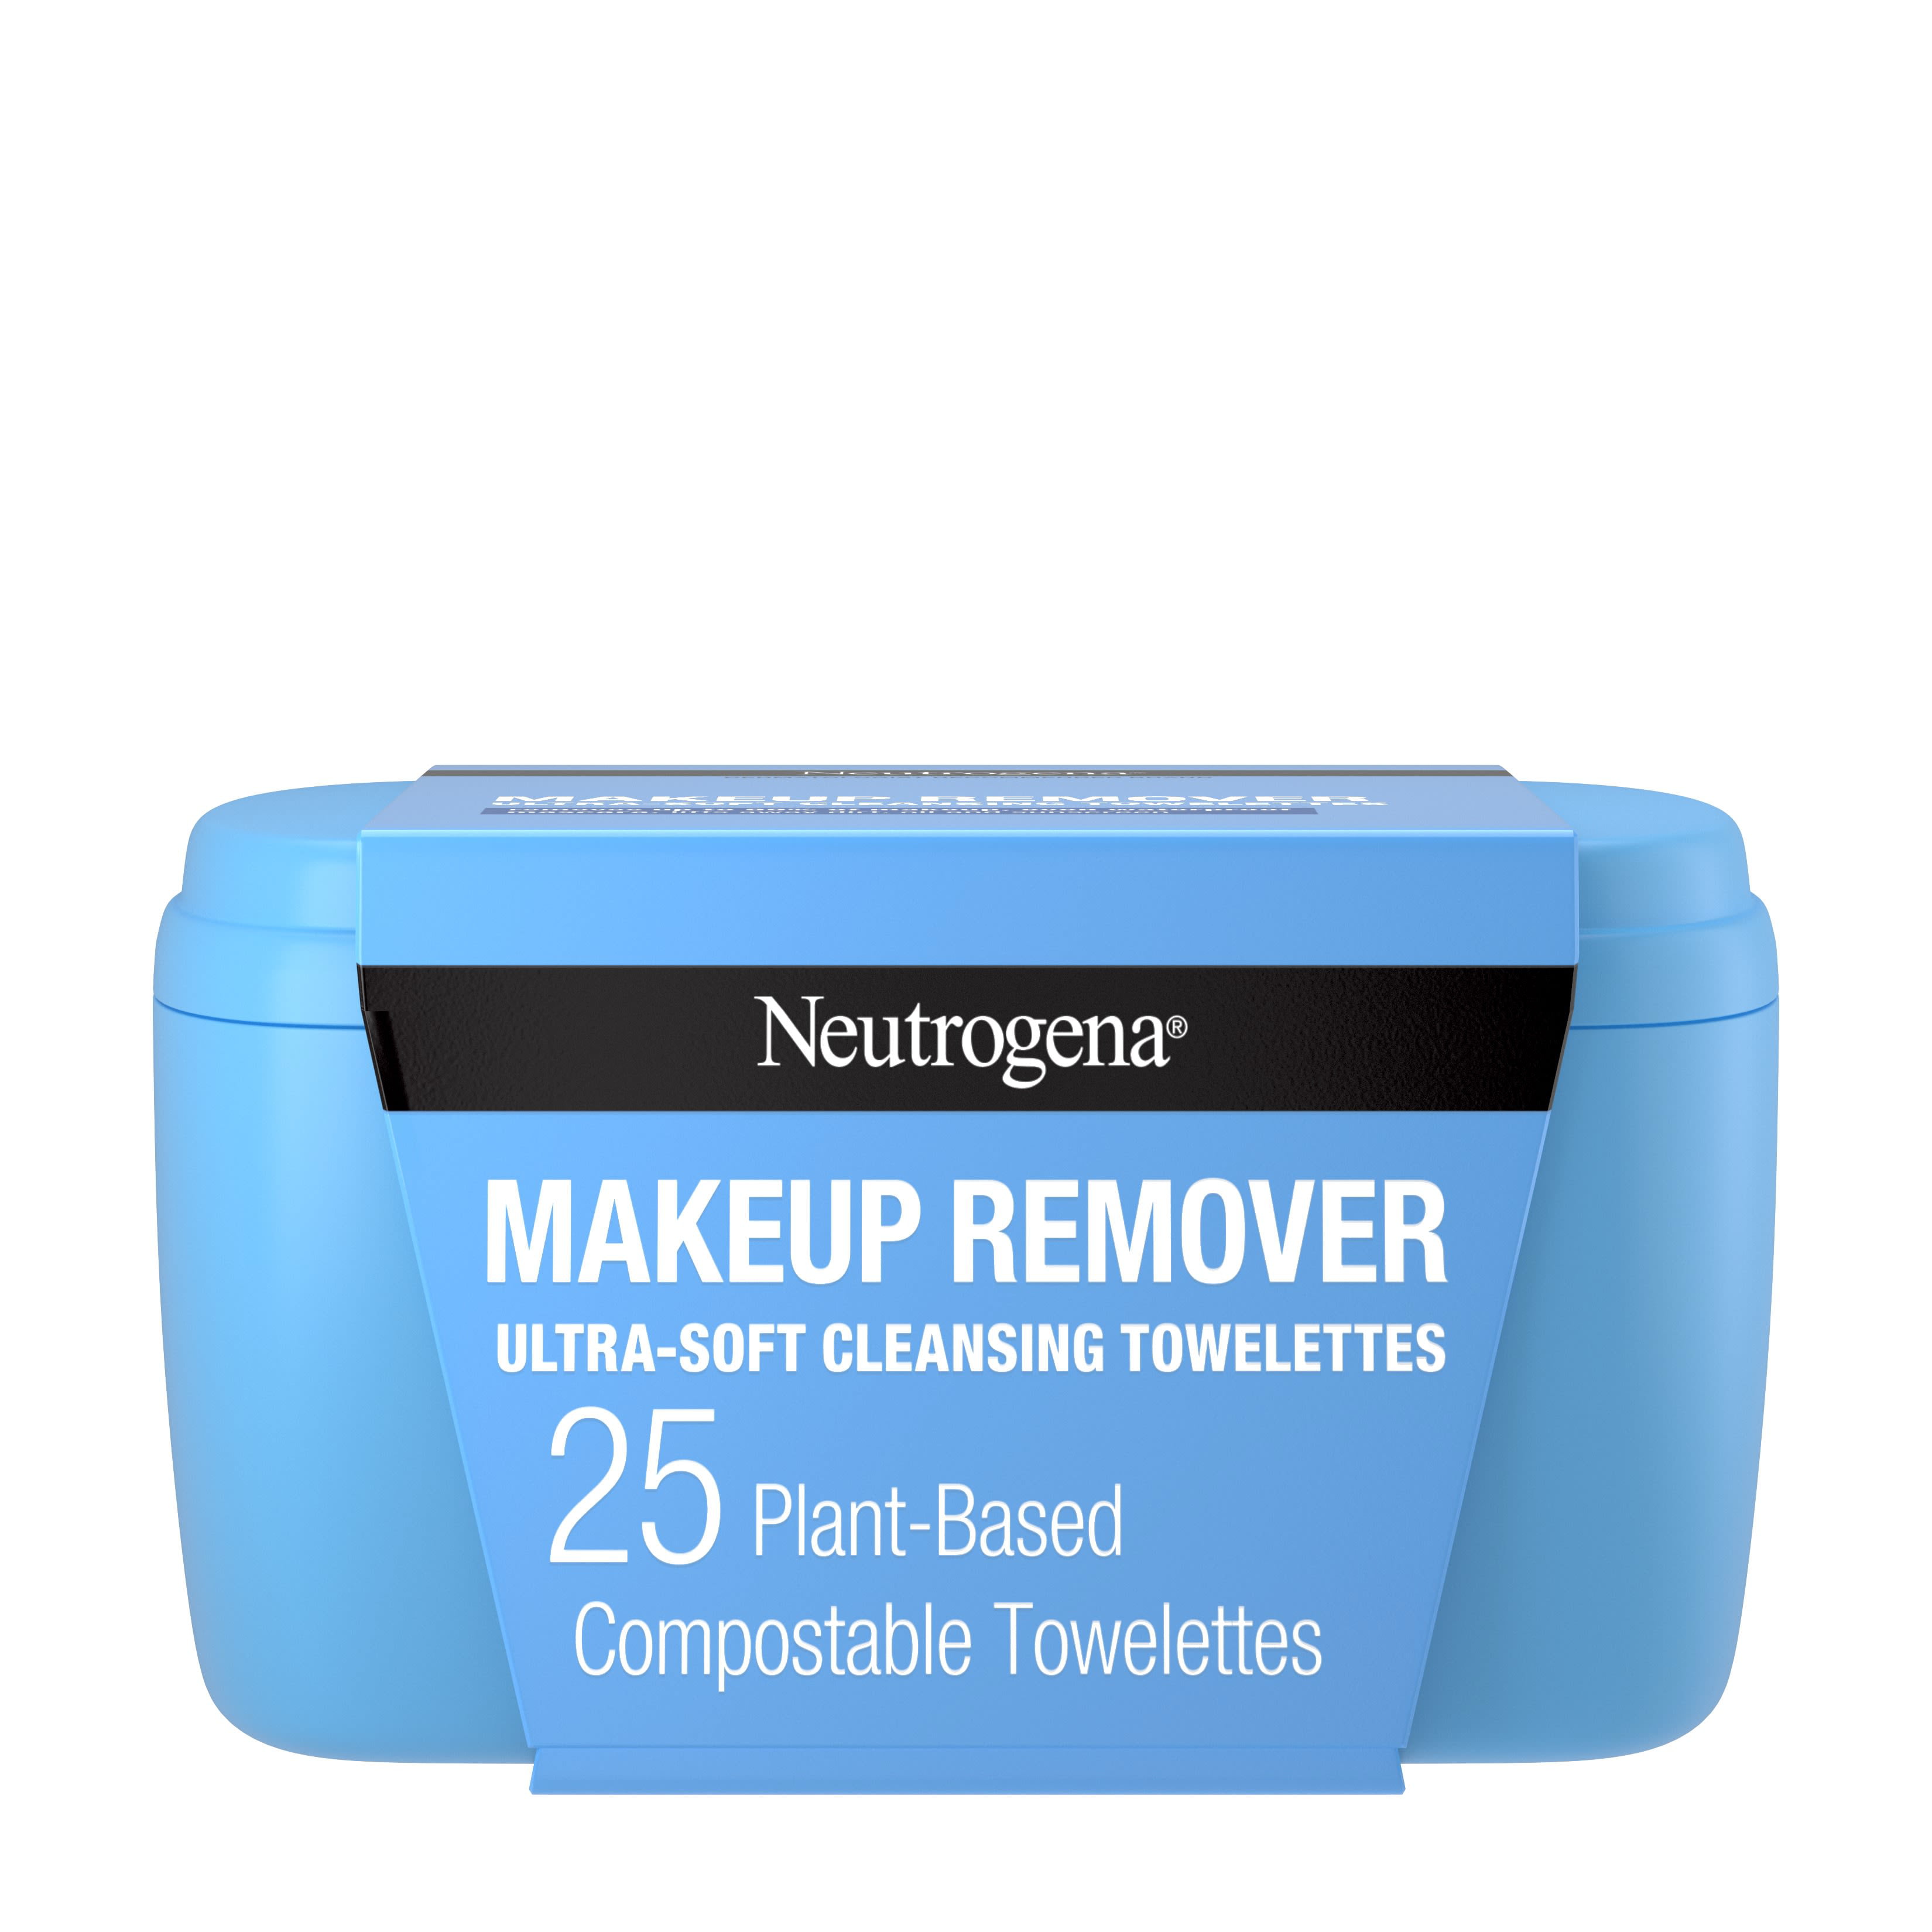 Neutrogena Makeup Remover Wipes and Face Cleansing Towelettes, 25 ct